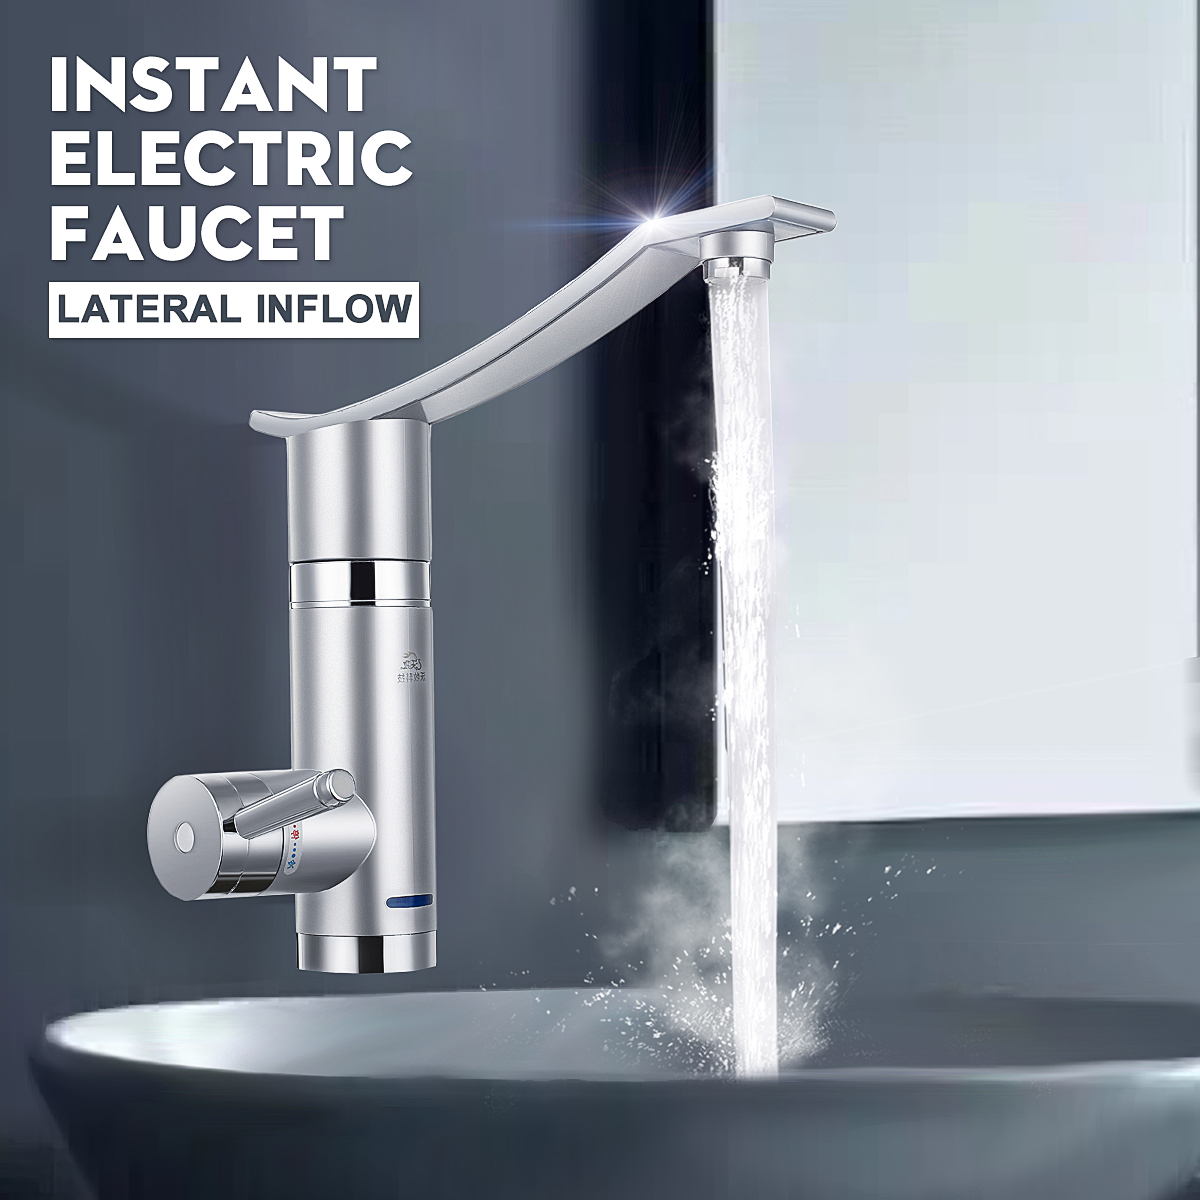 3000W-220V-Instant-Electric-Faucet-Lateral-Inflow-Bathroom-Kitchen-Hot-Water-Heating-Tap-1391924